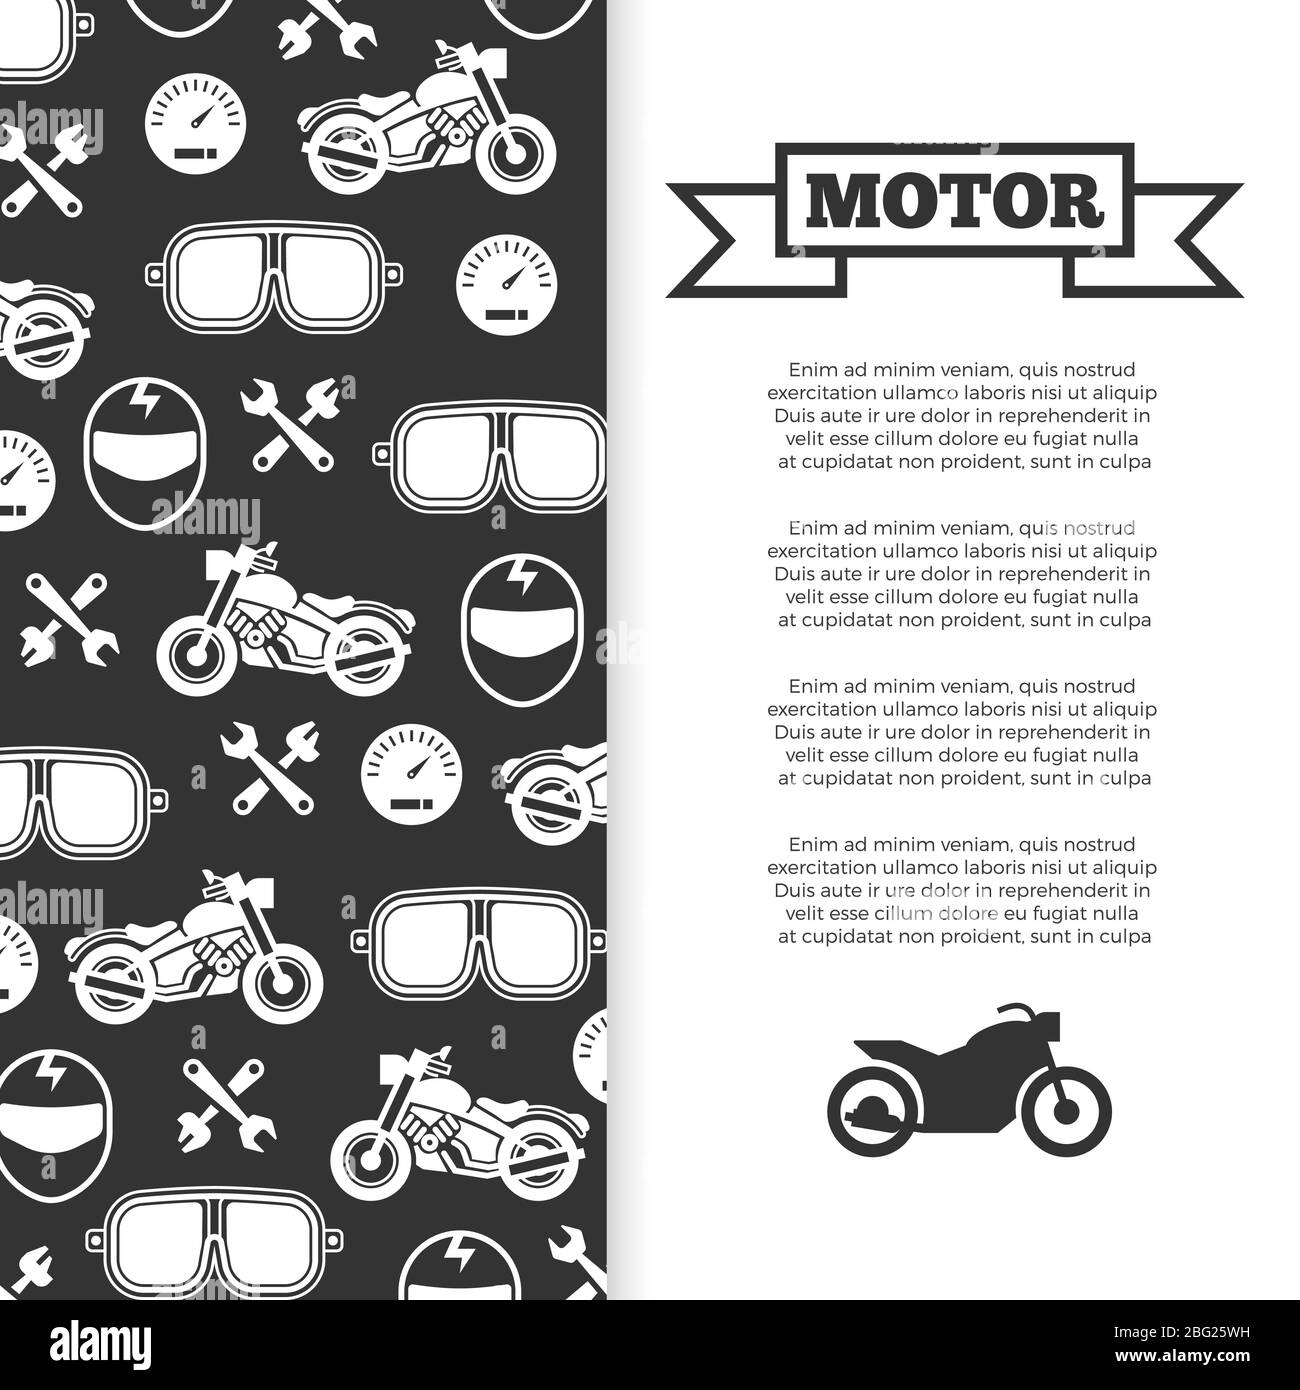 Motorbike motorcycle motor banner and poster background design. Vector illustration Stock Vector